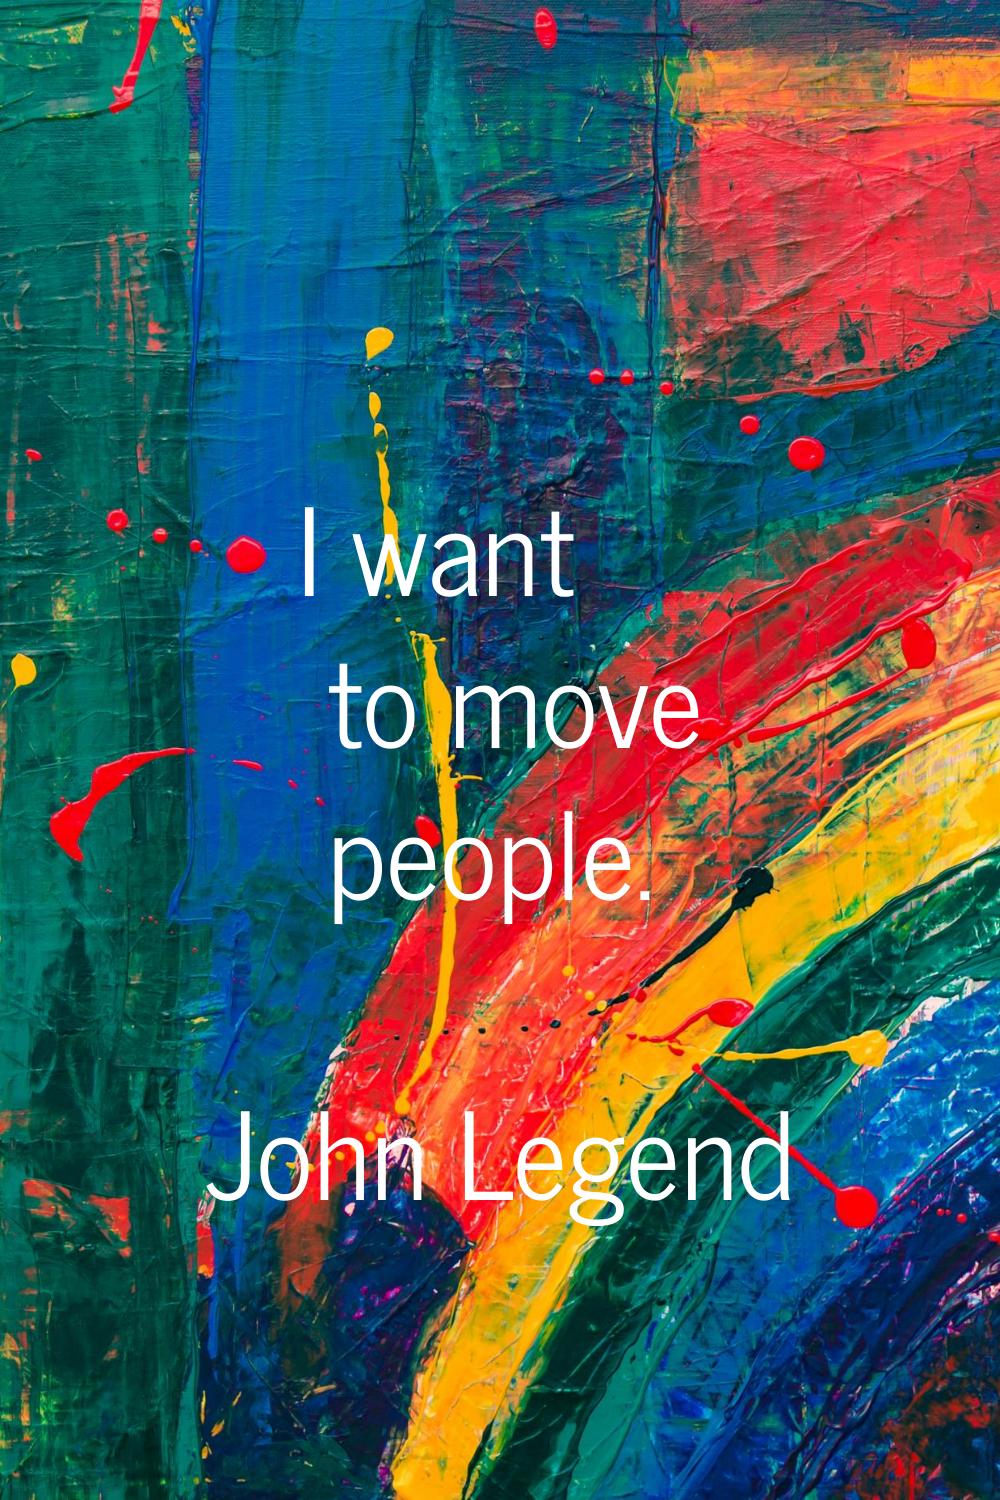 I want to move people.